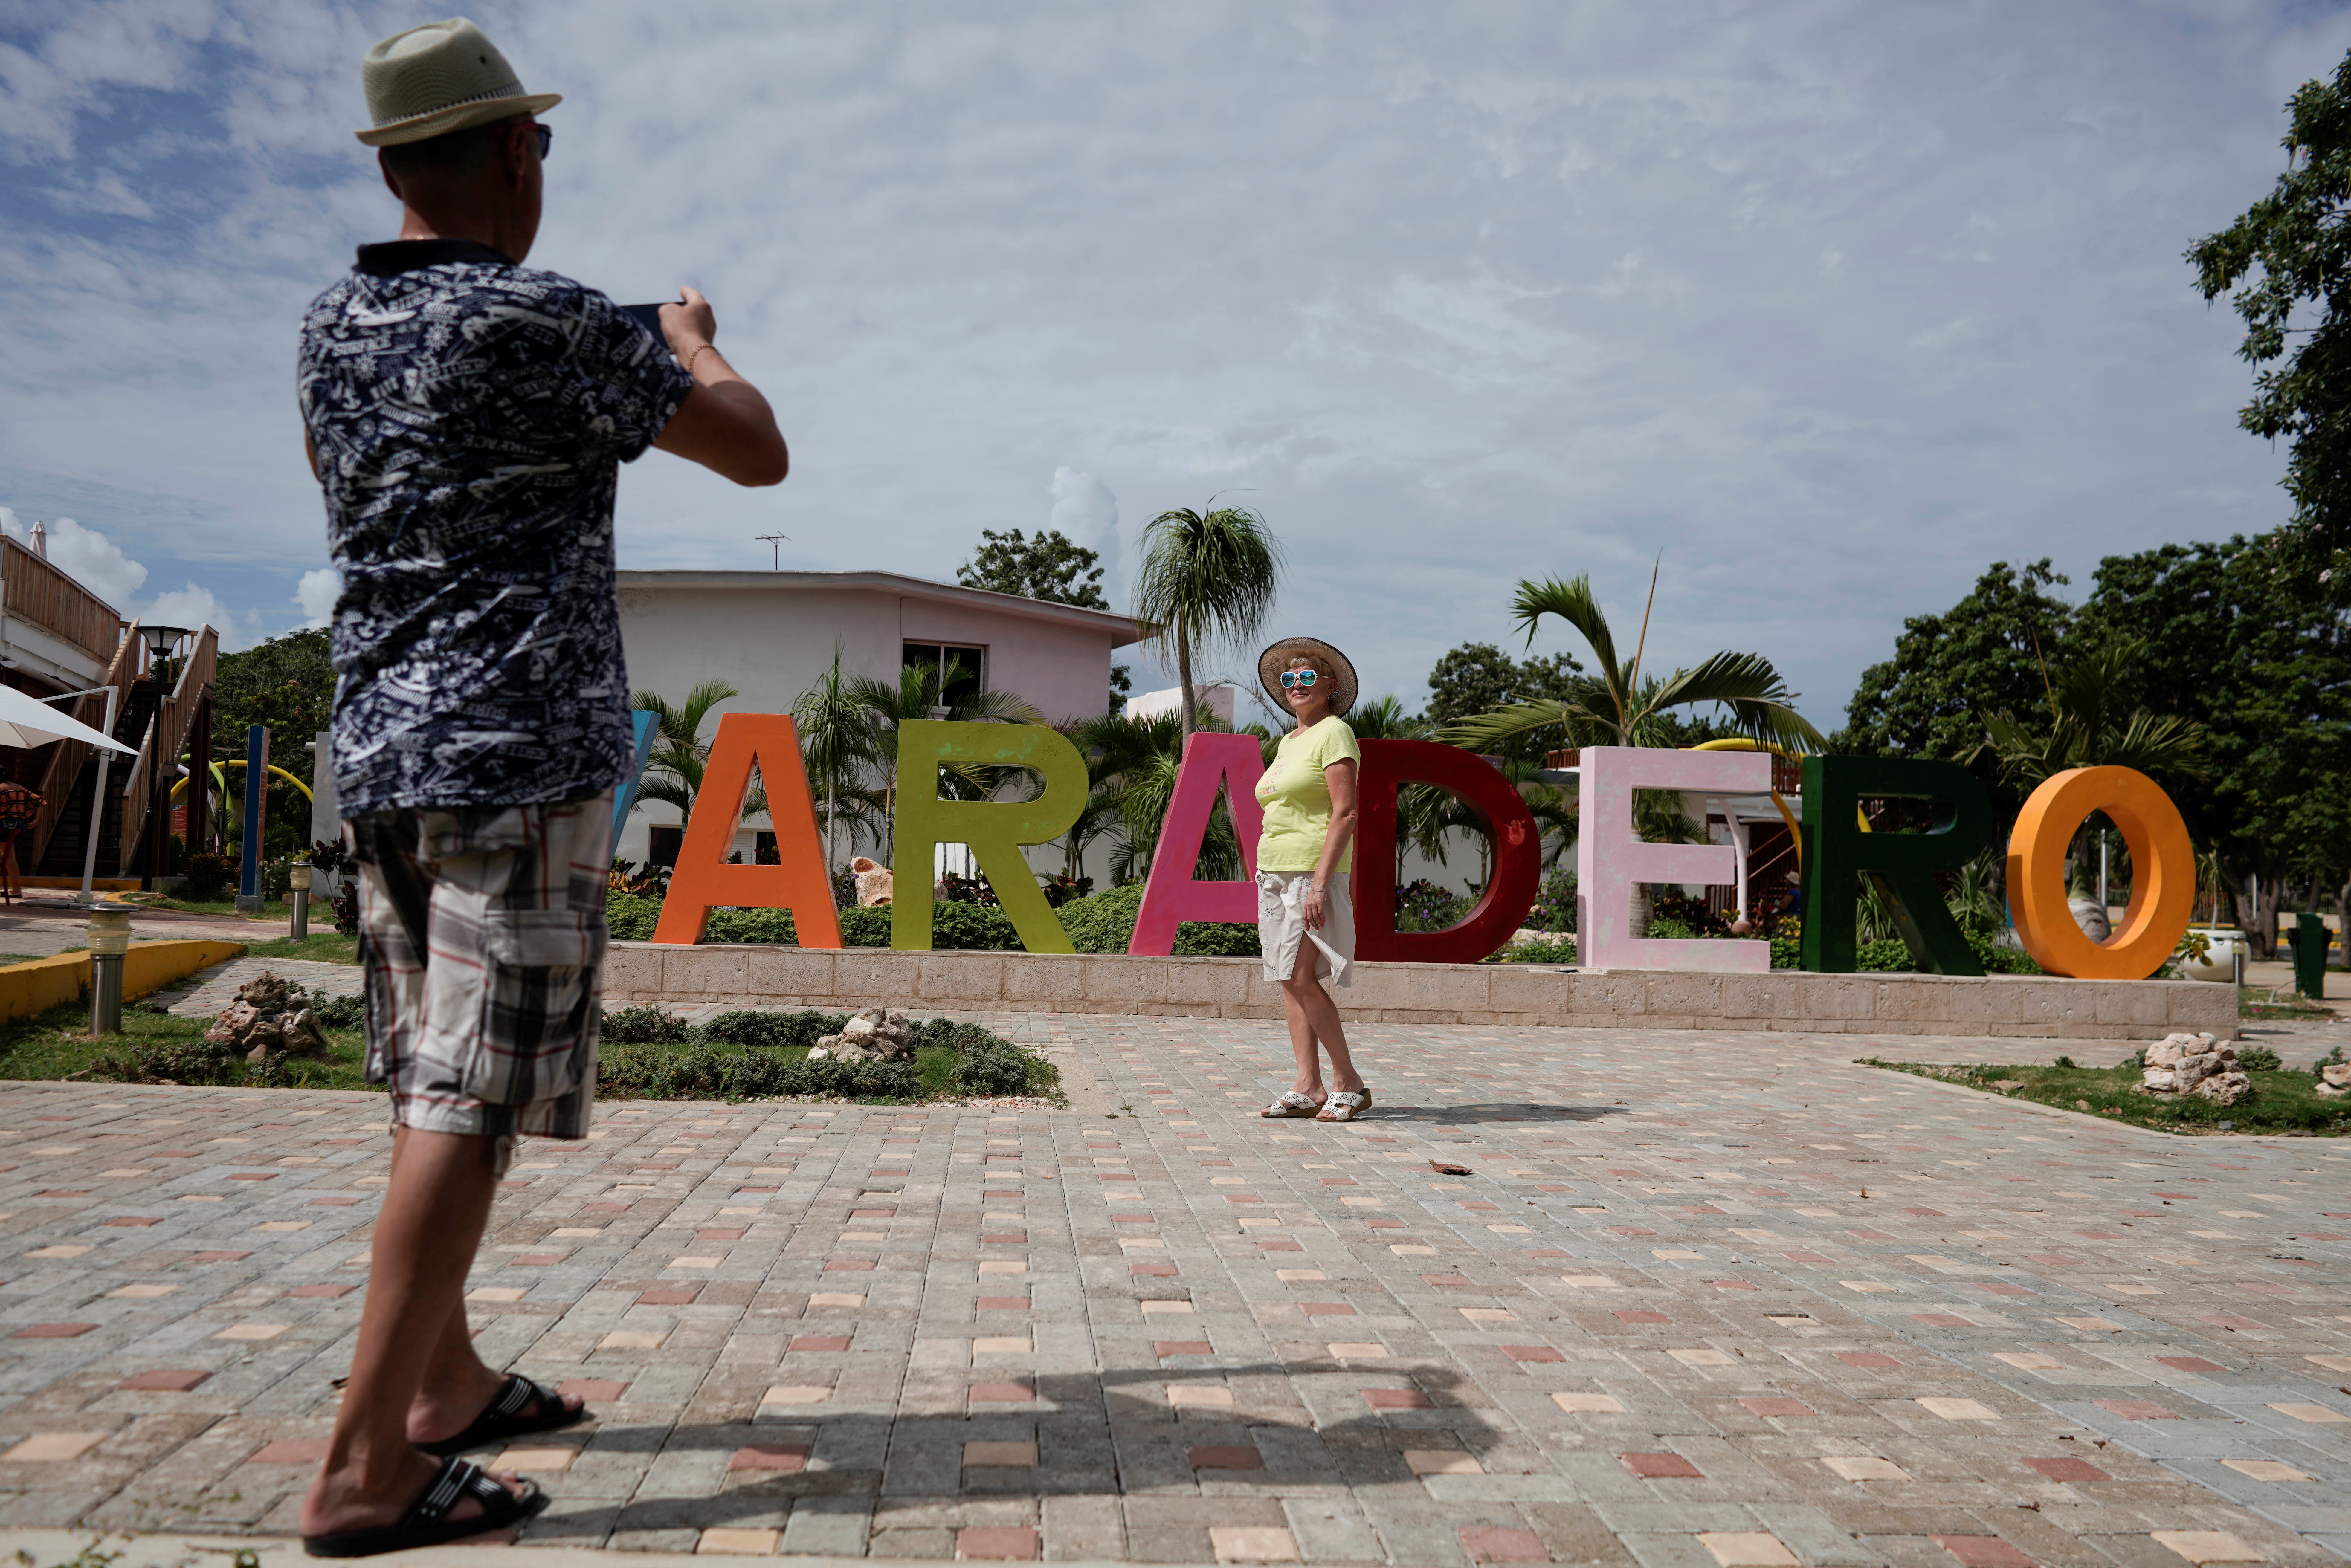 Tourists take pictures amid concerns about the spread of the coronavirus disease (COVID-19) in Varadero, Cuba, October 22, 2021. Picture taken on October 22, 2021. REUTERS/Alexandre Meneghini